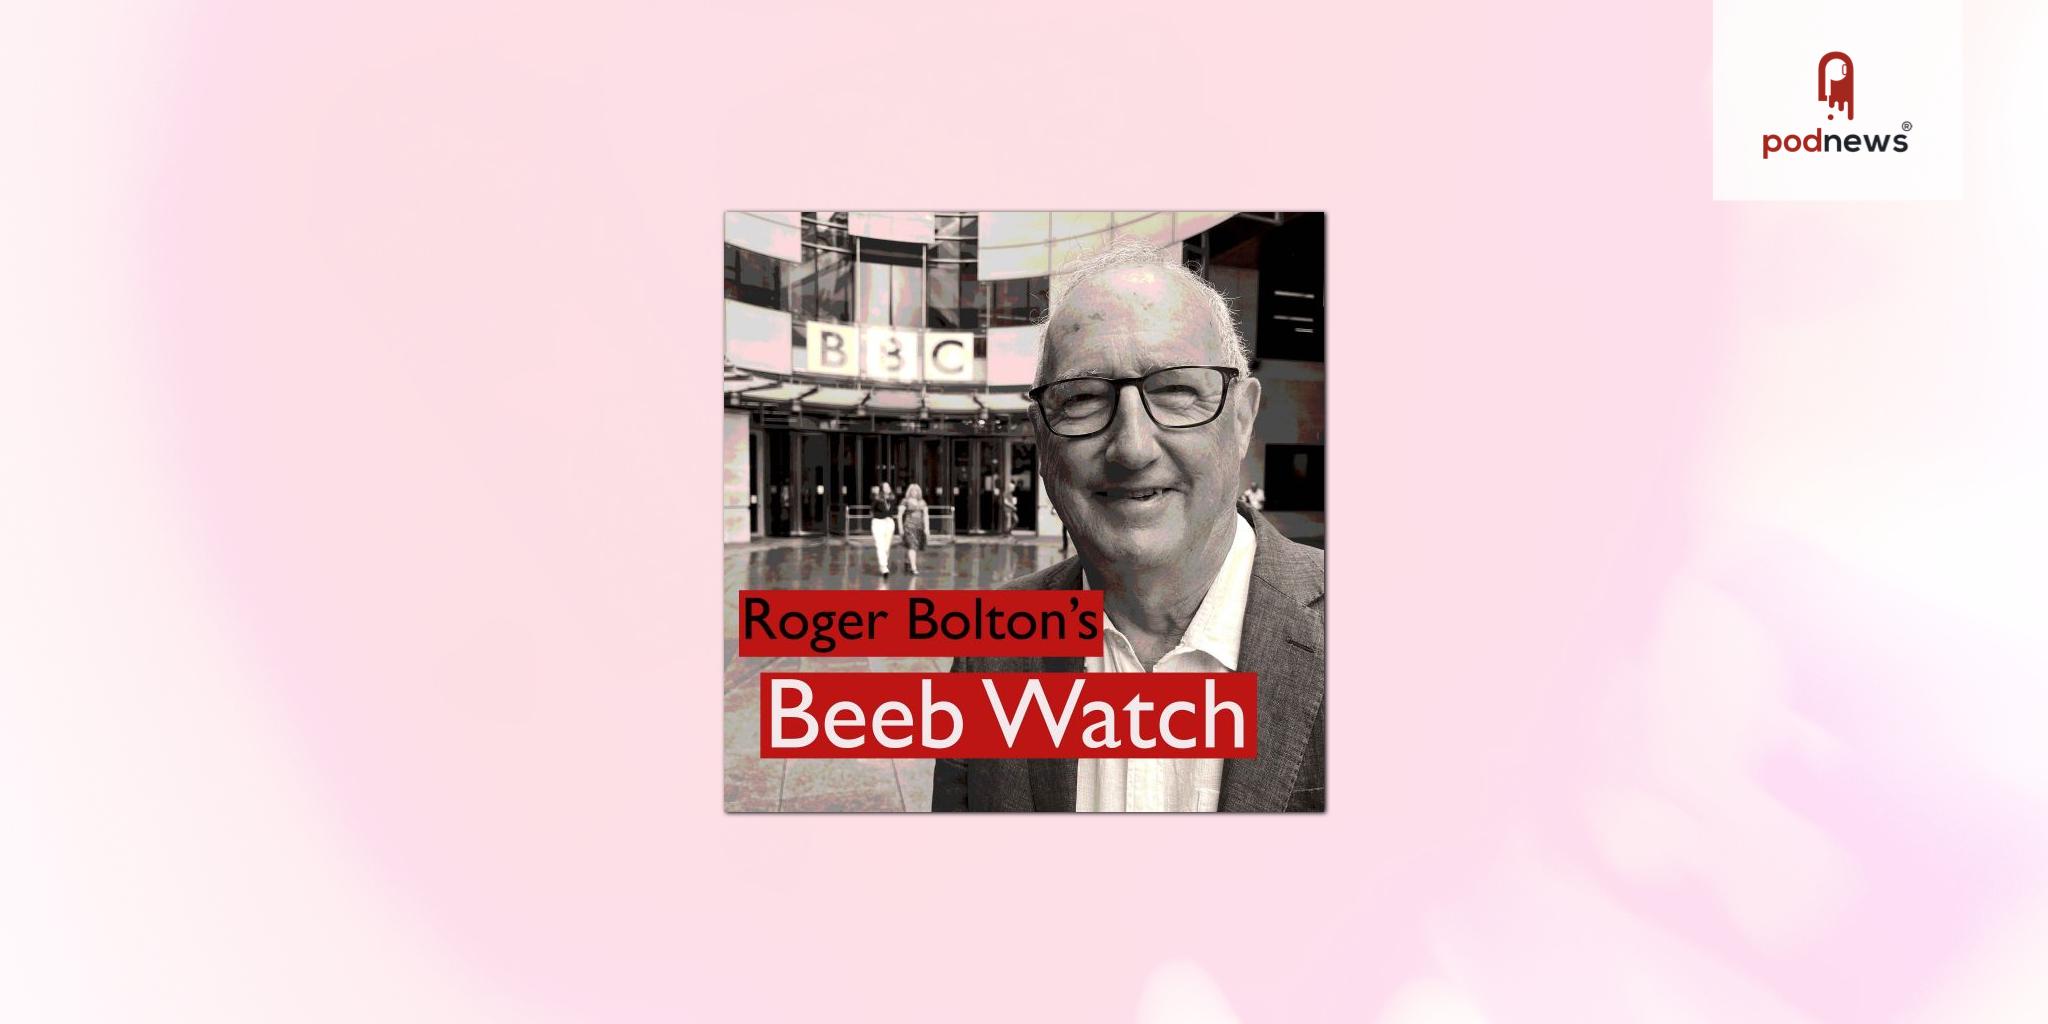 Roger Bolton launches podcast, Roger Bolton’s Beeb Watch